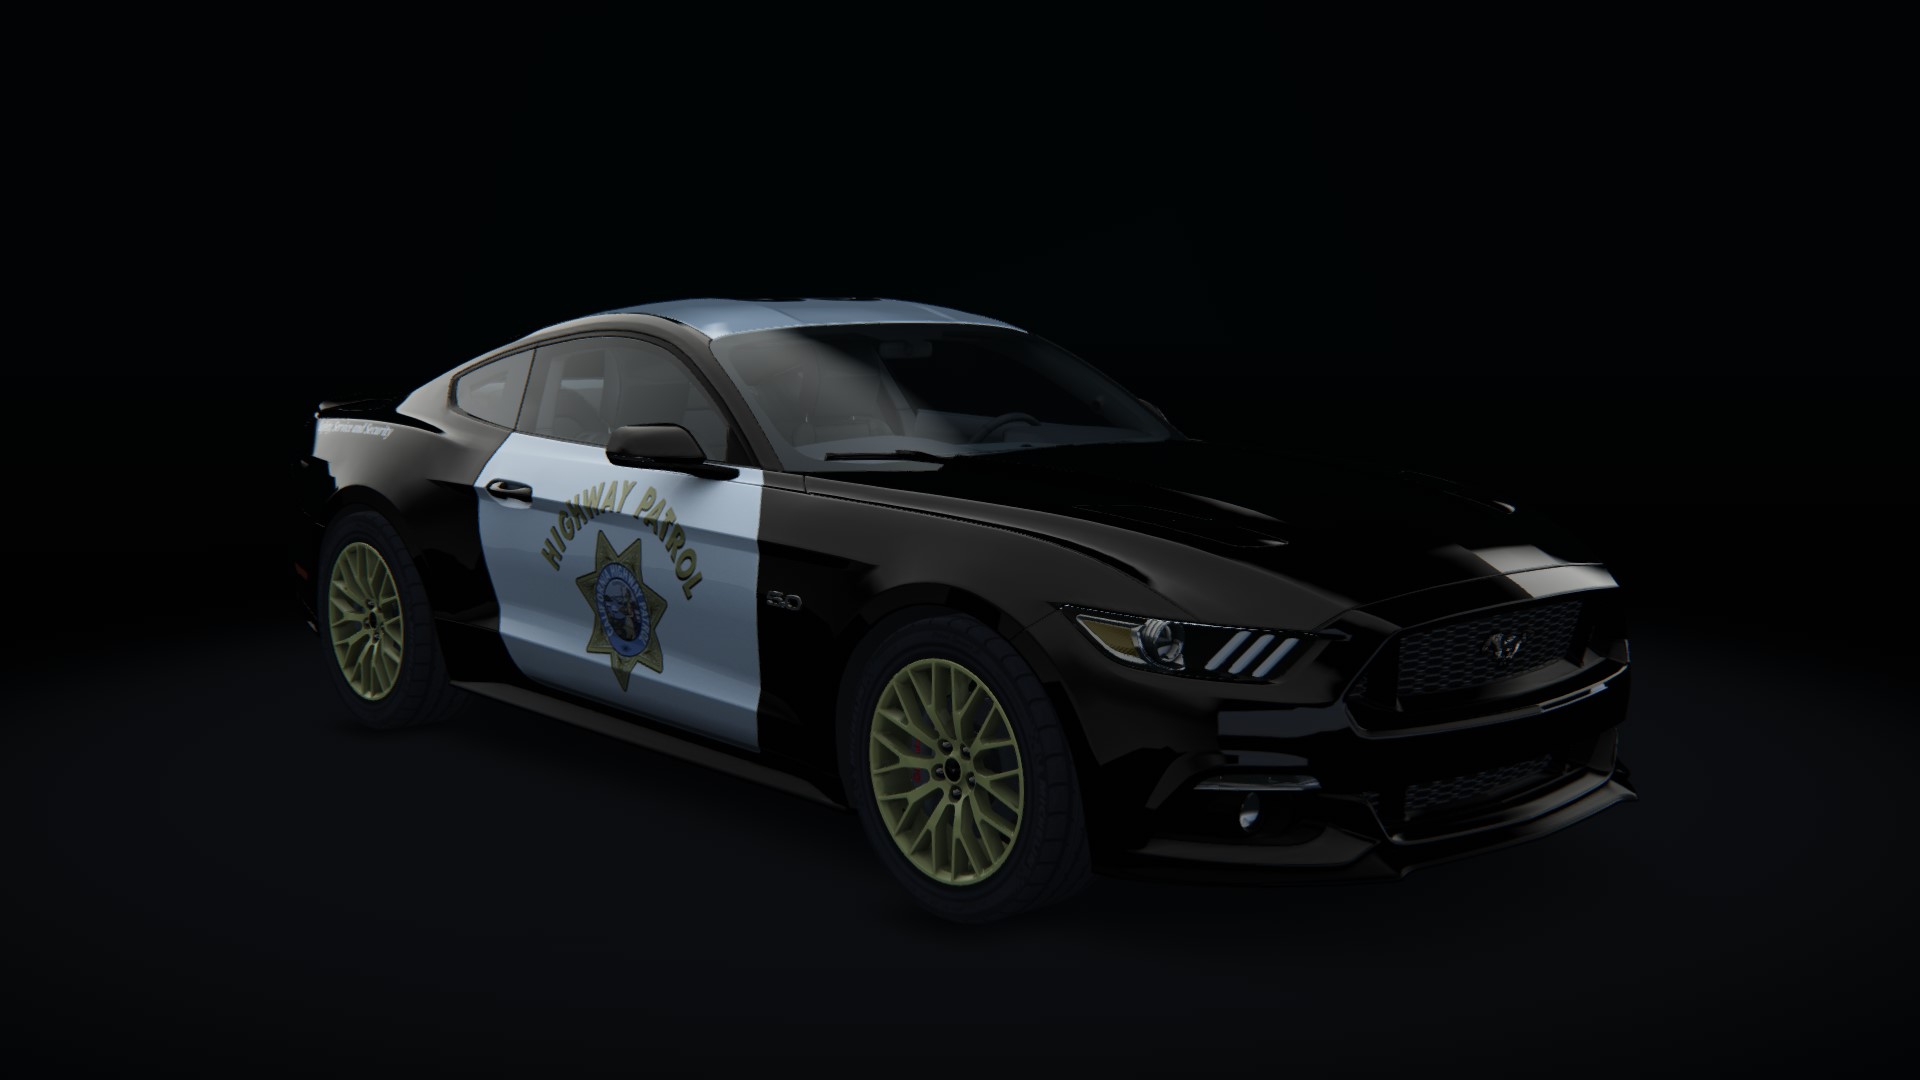 Ford Mustang 2015, skin chp_unit_98